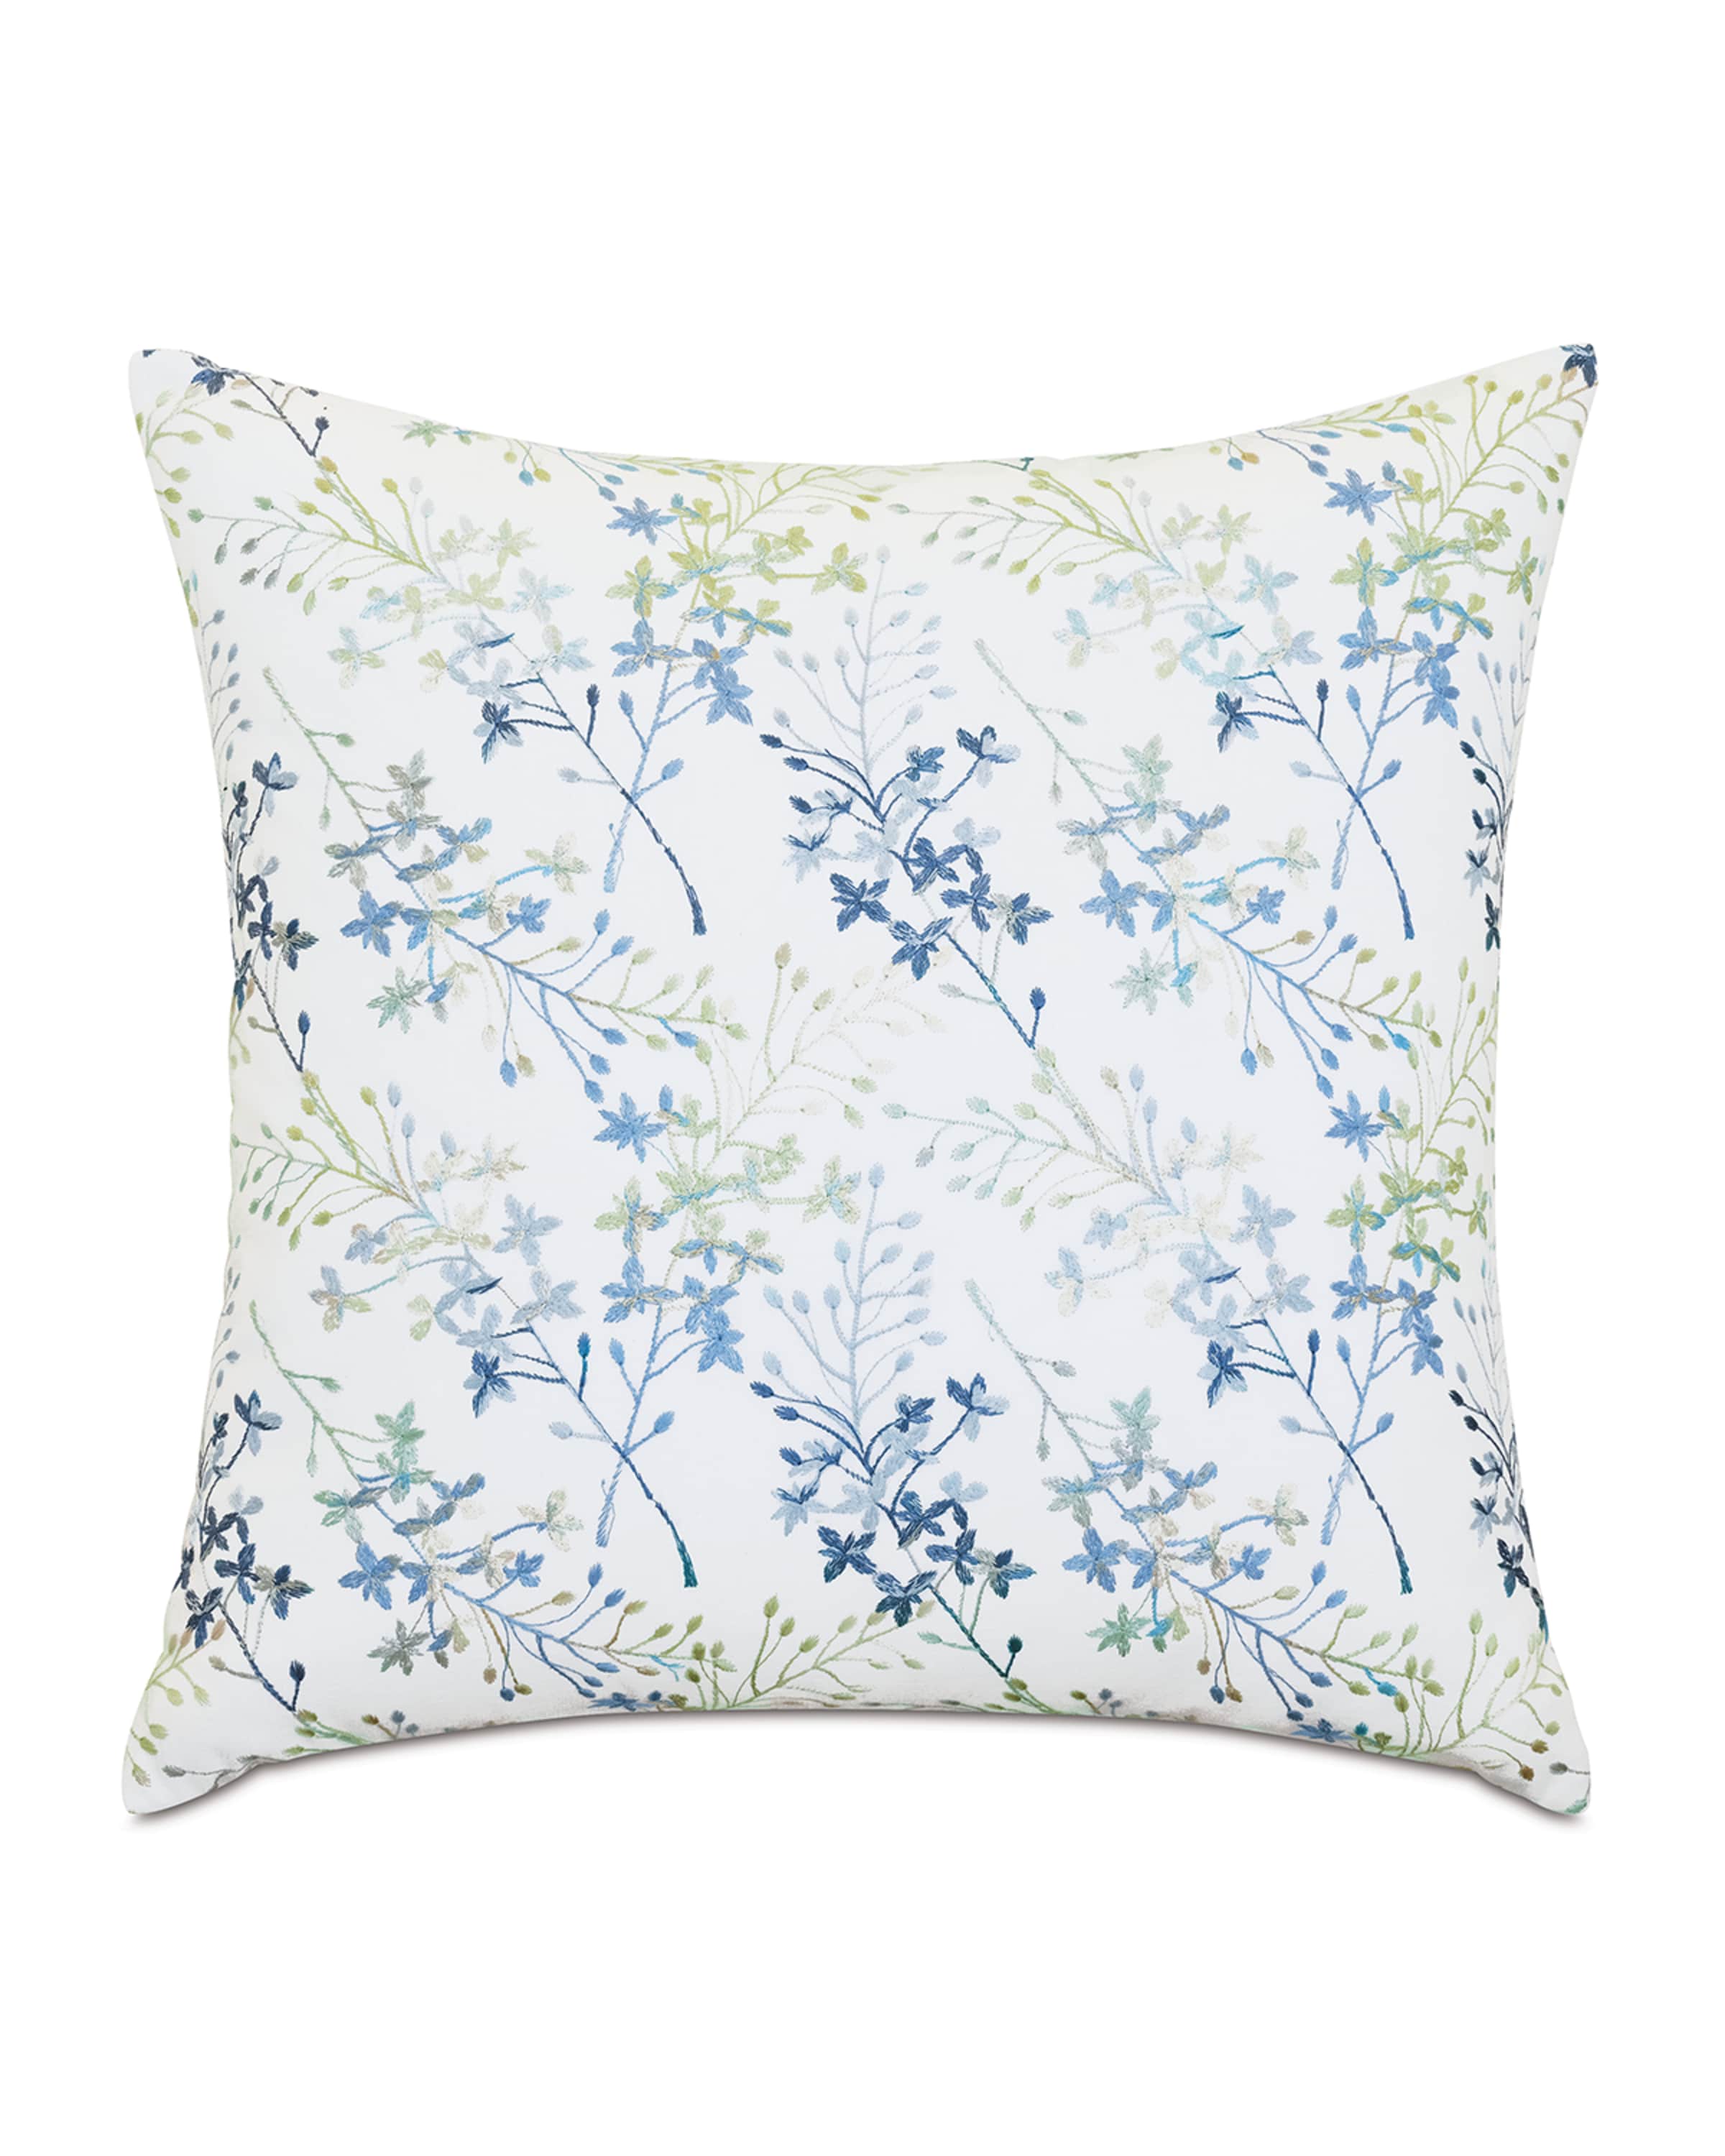 Eastern Accents Aerith Frost Decorative Pillow and Matching Items ...